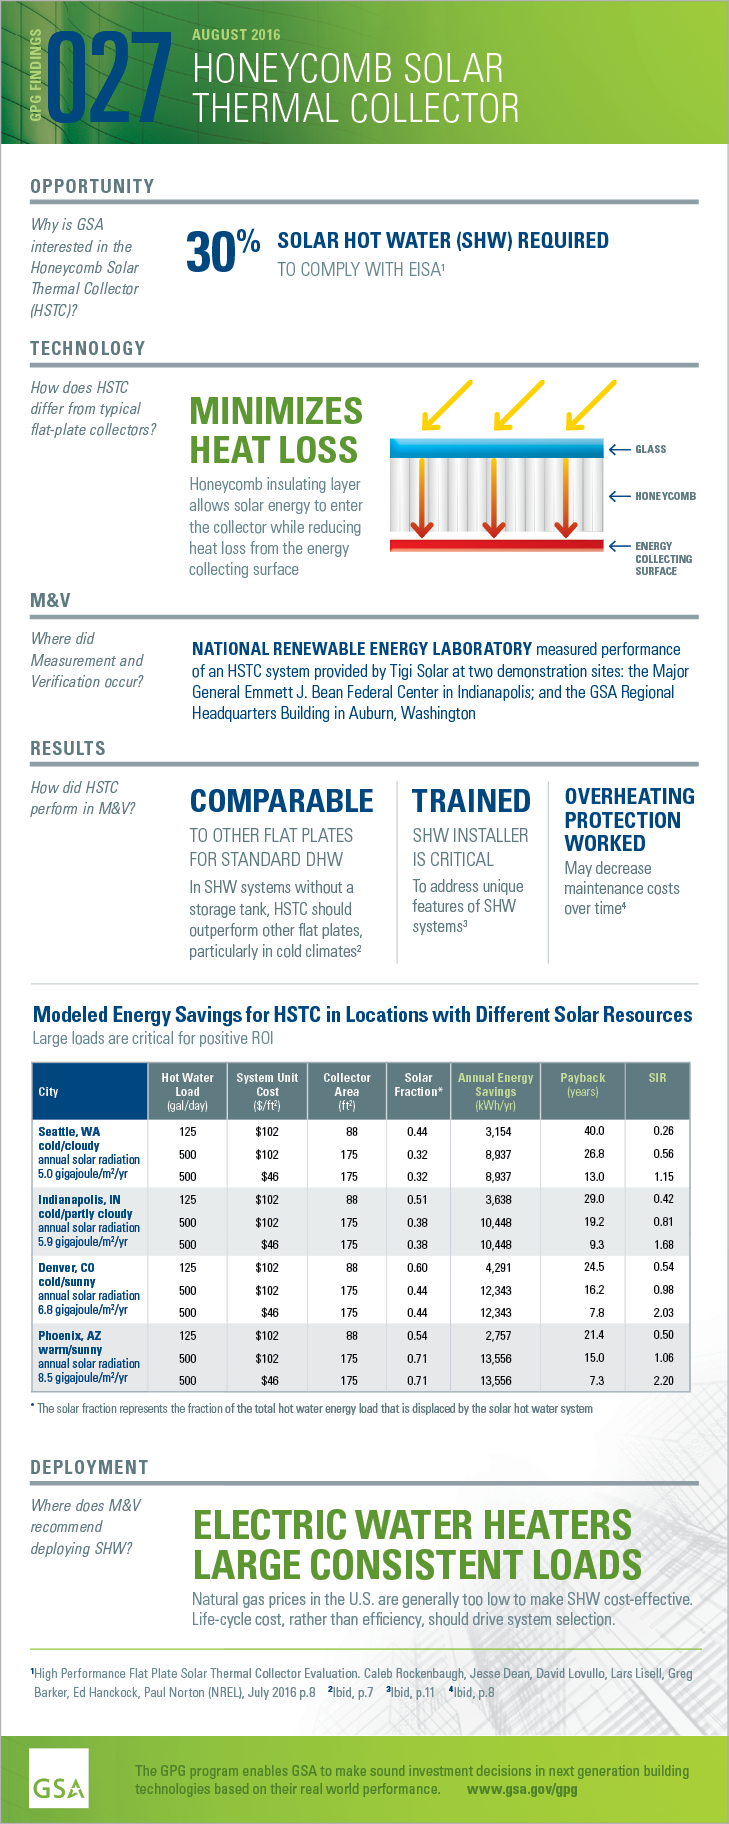 Download the PDF version of the full-sized infographic for GPG027 Honeycomb Solar Thermal Collector.